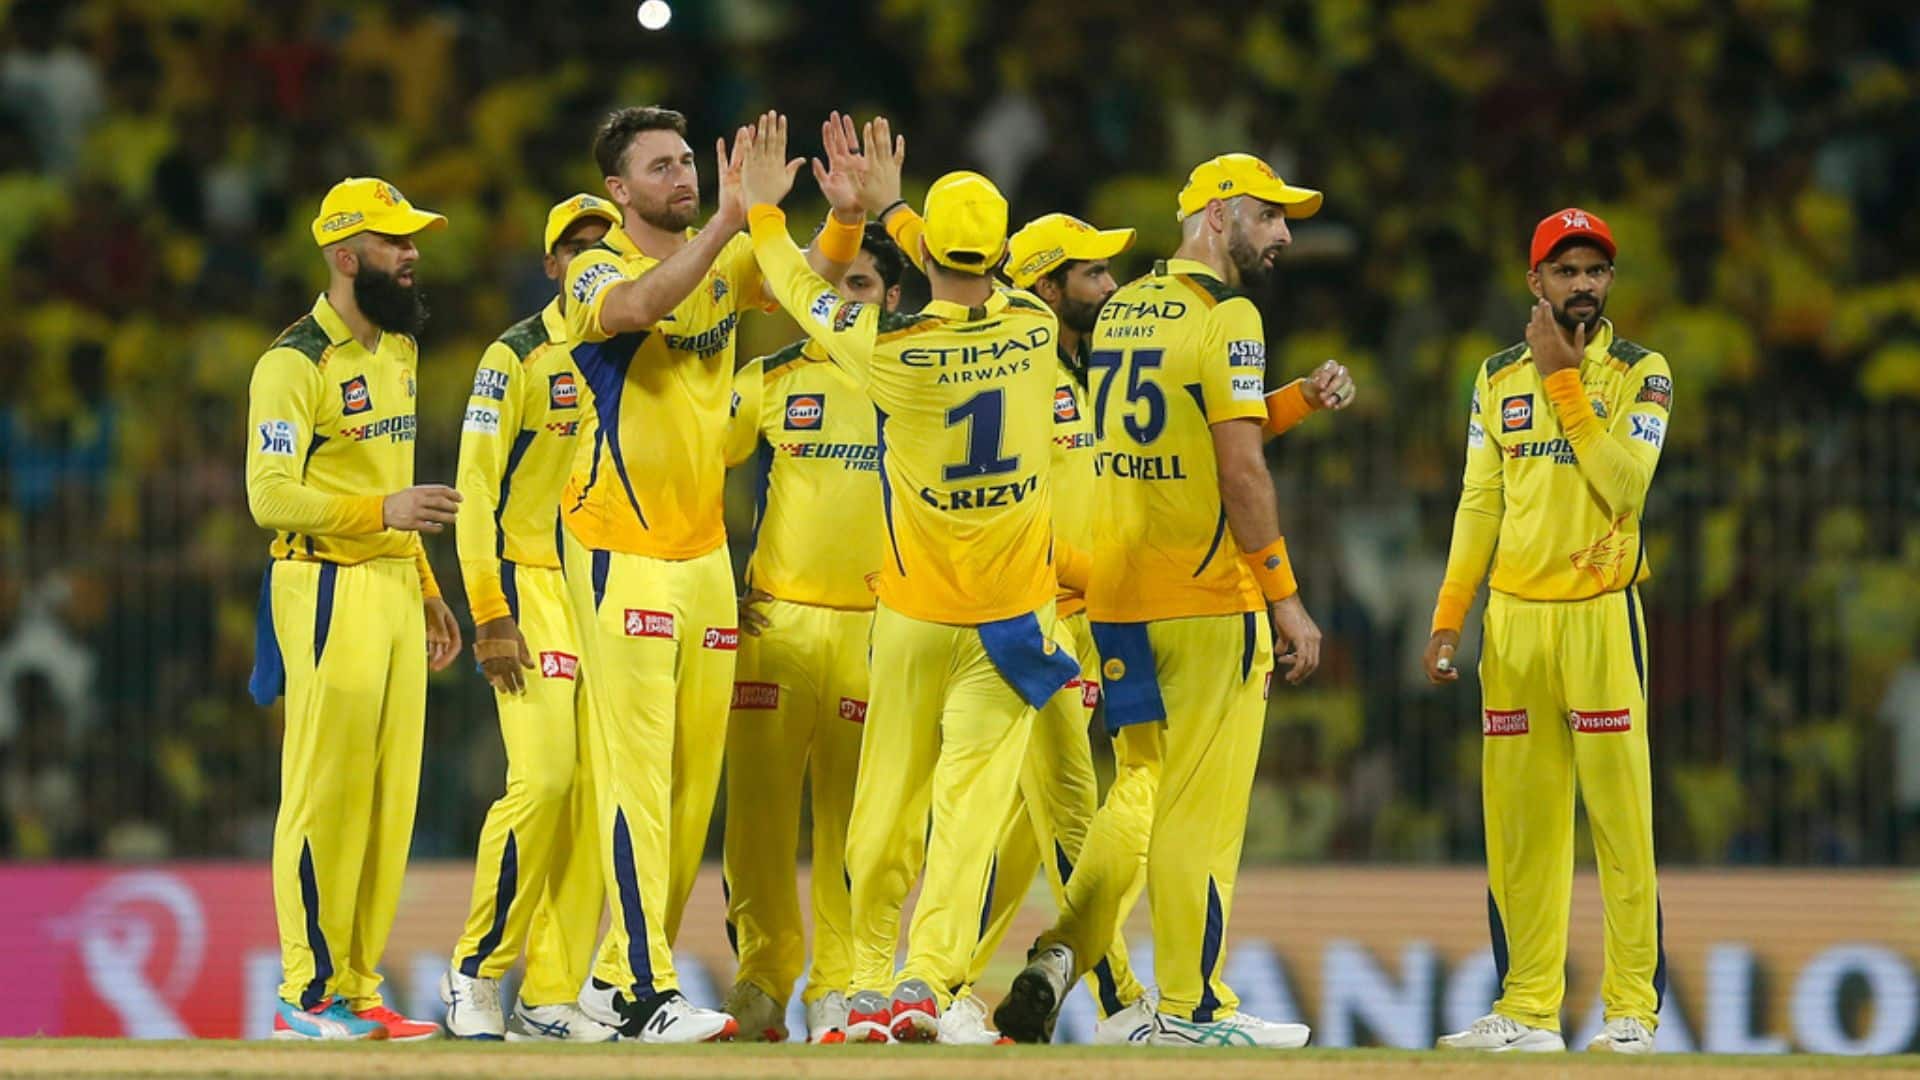 CSK players in action [AP]